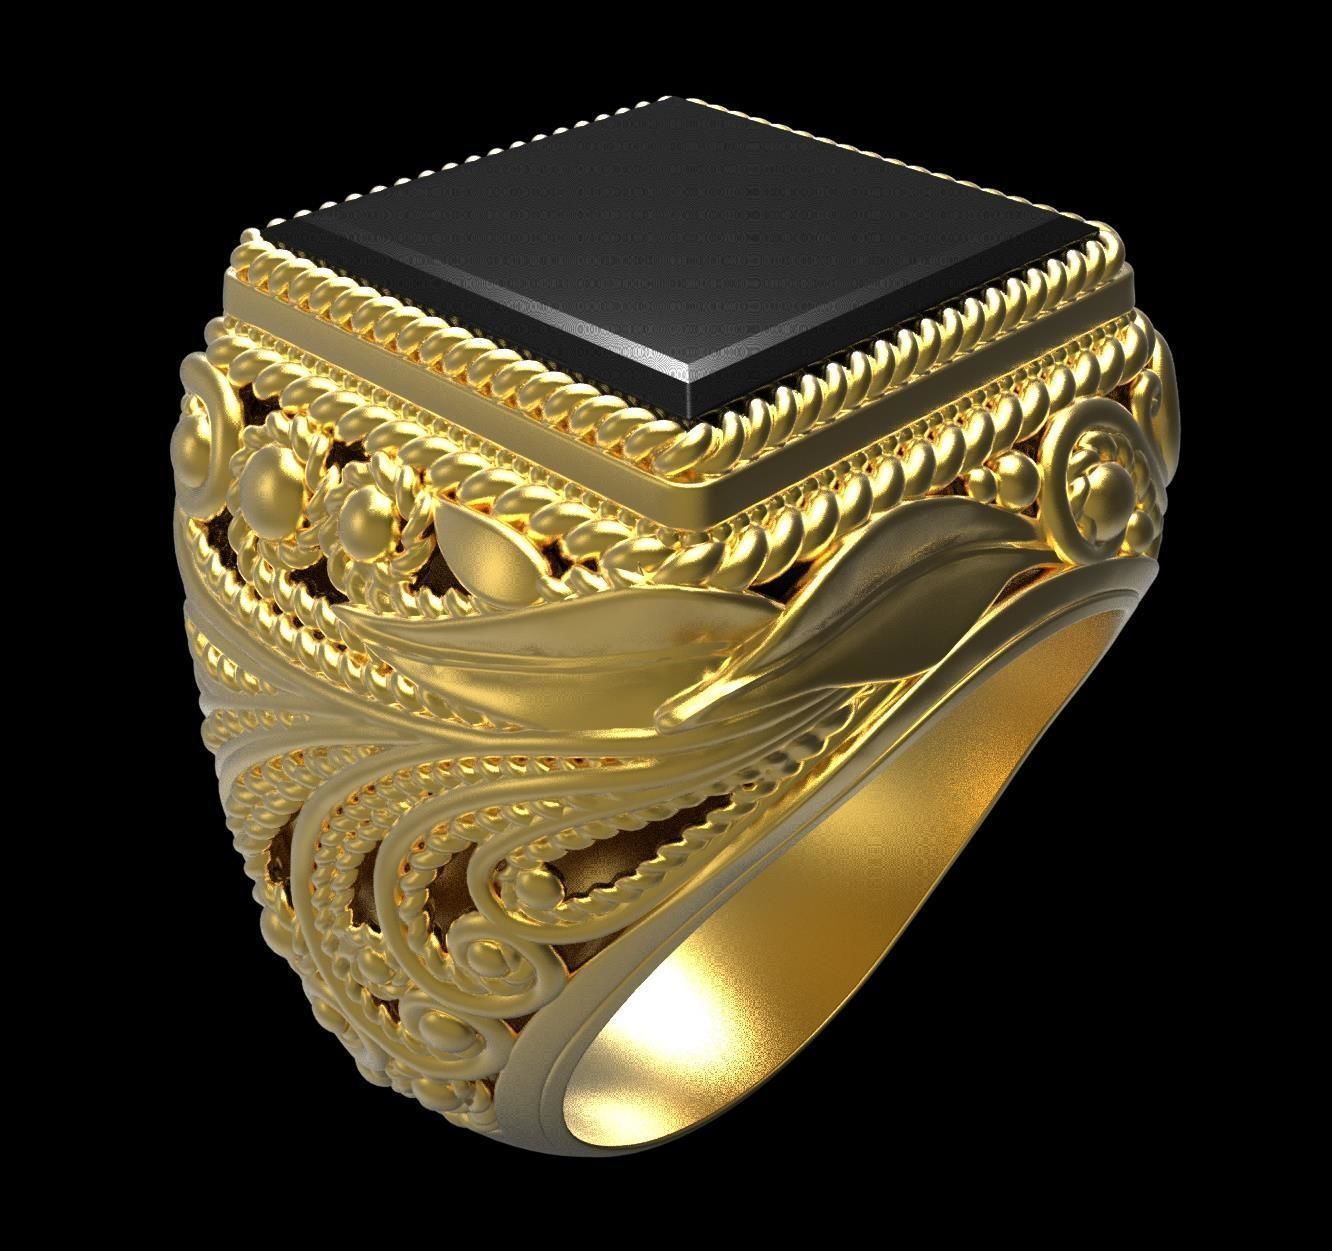 1918I will create 3d jewelry design for 3d printing